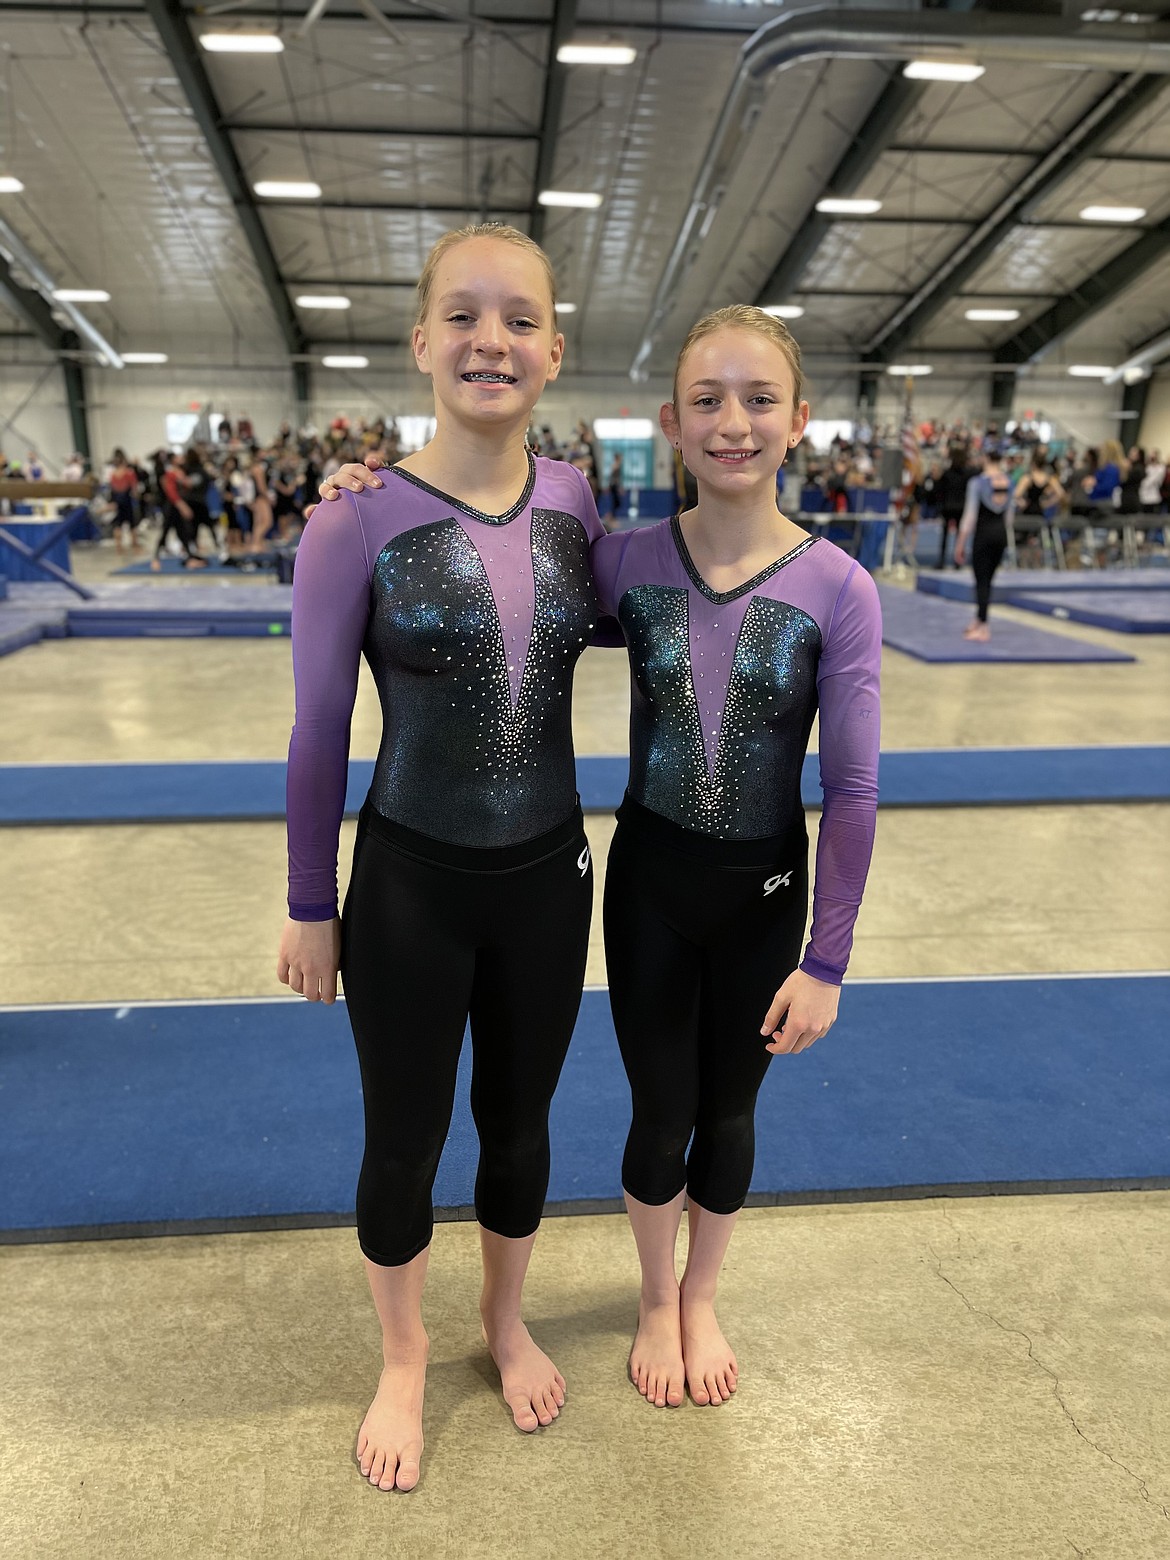 Courtesy photo
Avant Coeur Gymnastics Level 7s at the Region 2 championships in Helena, Mont. From left are Kennedy Phillips and Kayce George.